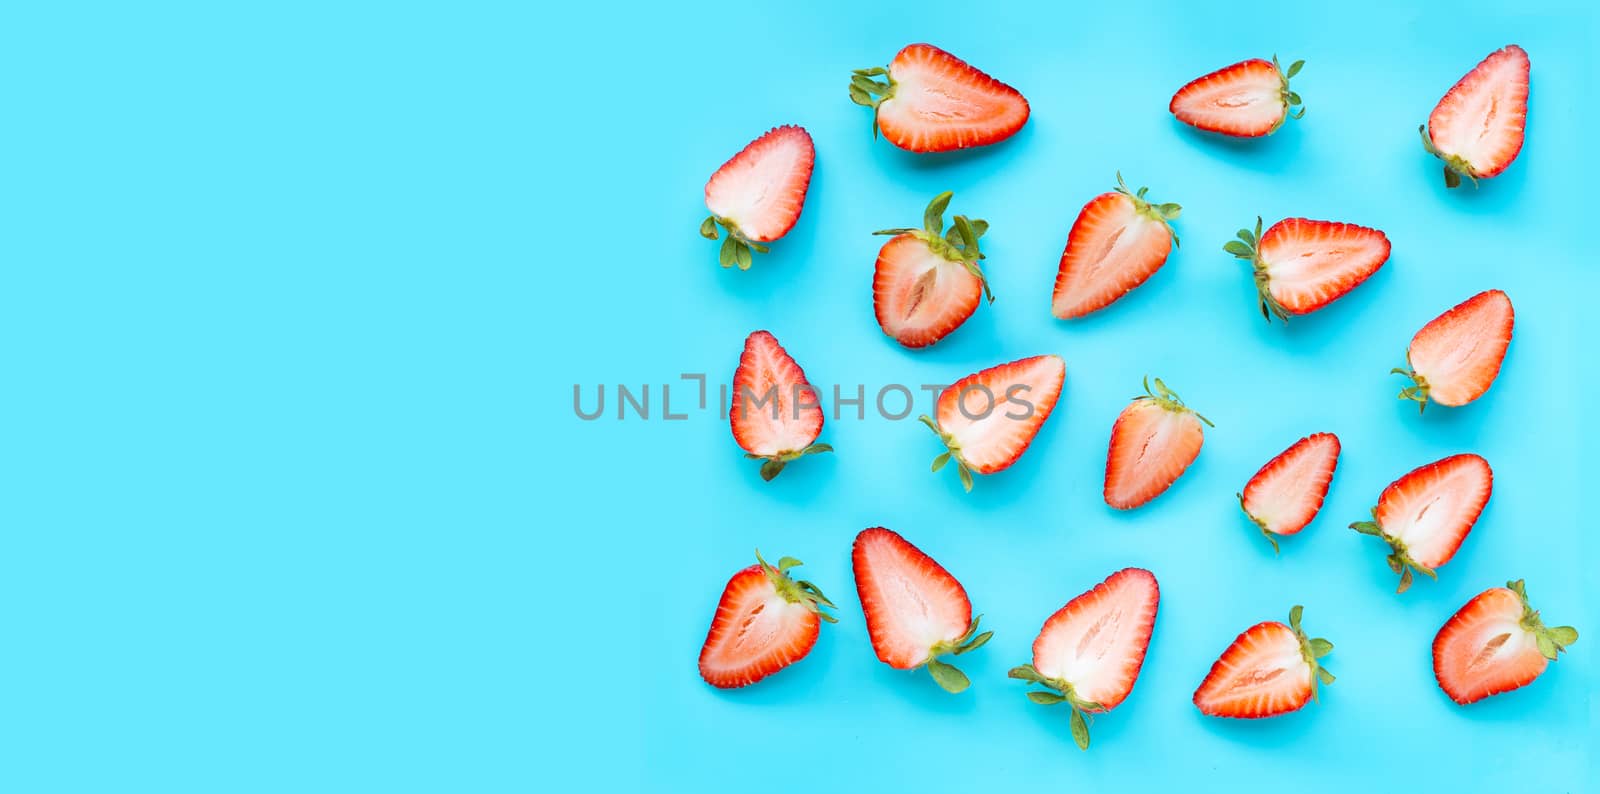 Ripe strawberries on blue background. Copy space